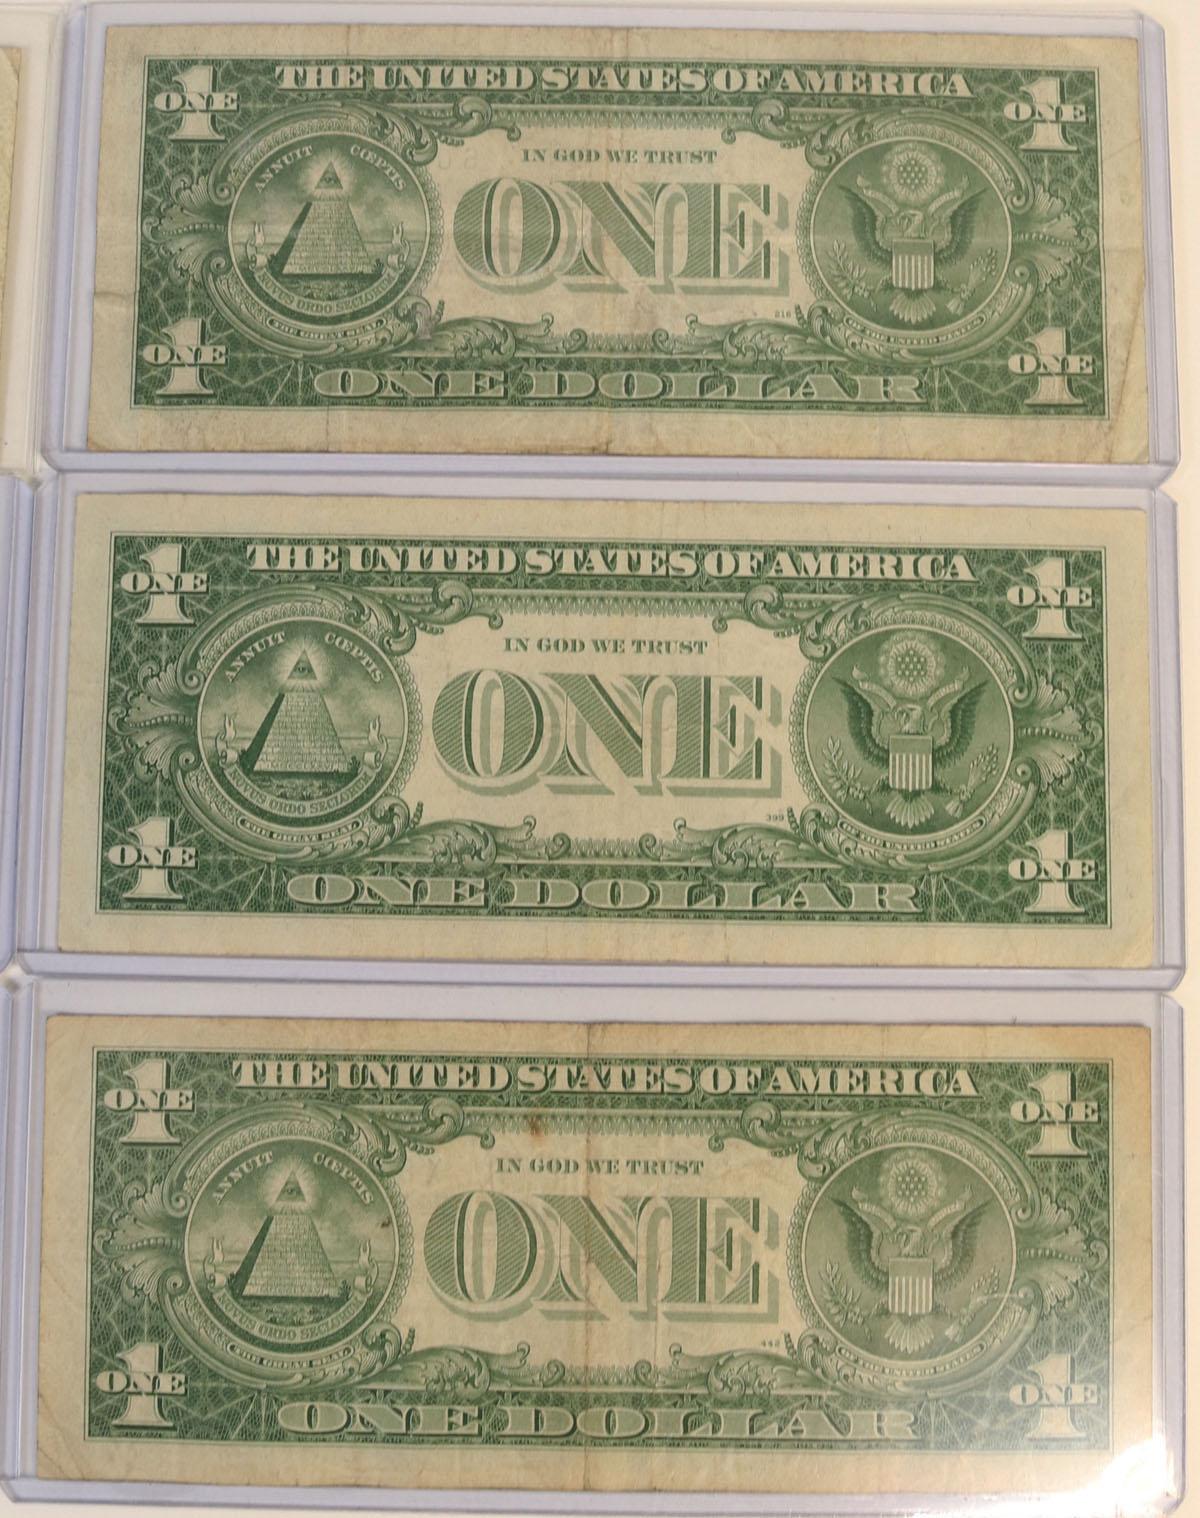 1935 E & F $1 Blue Seal Silver Certificate Star Notes, 2006 $1 Star Note &